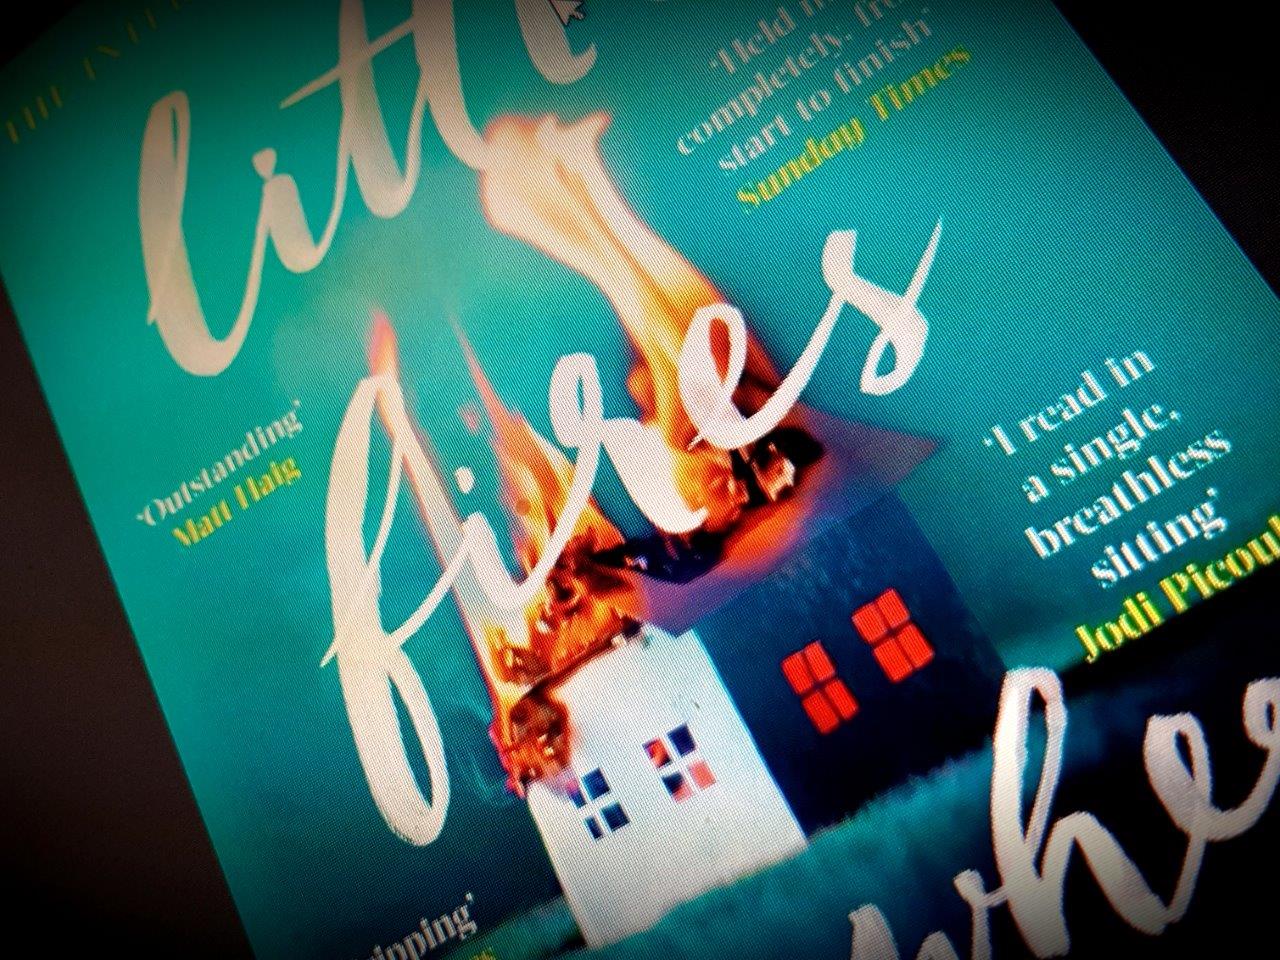 little fires everywhere book review